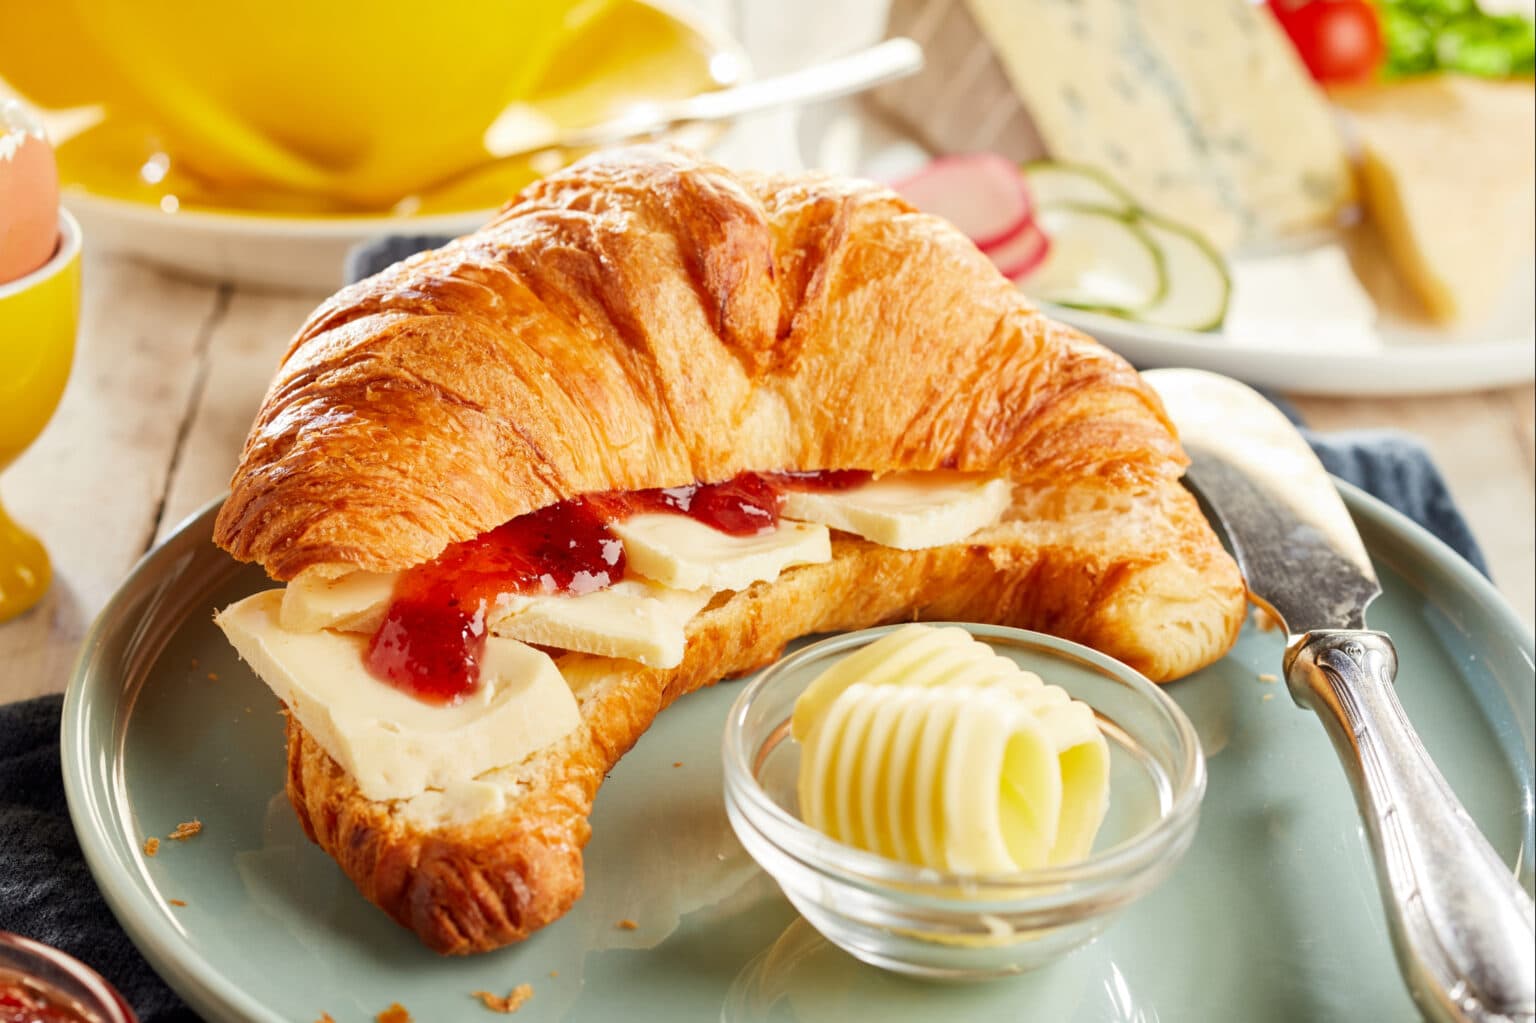 26 Croissant Fillings For the Perfect Pastry - Insanely Good